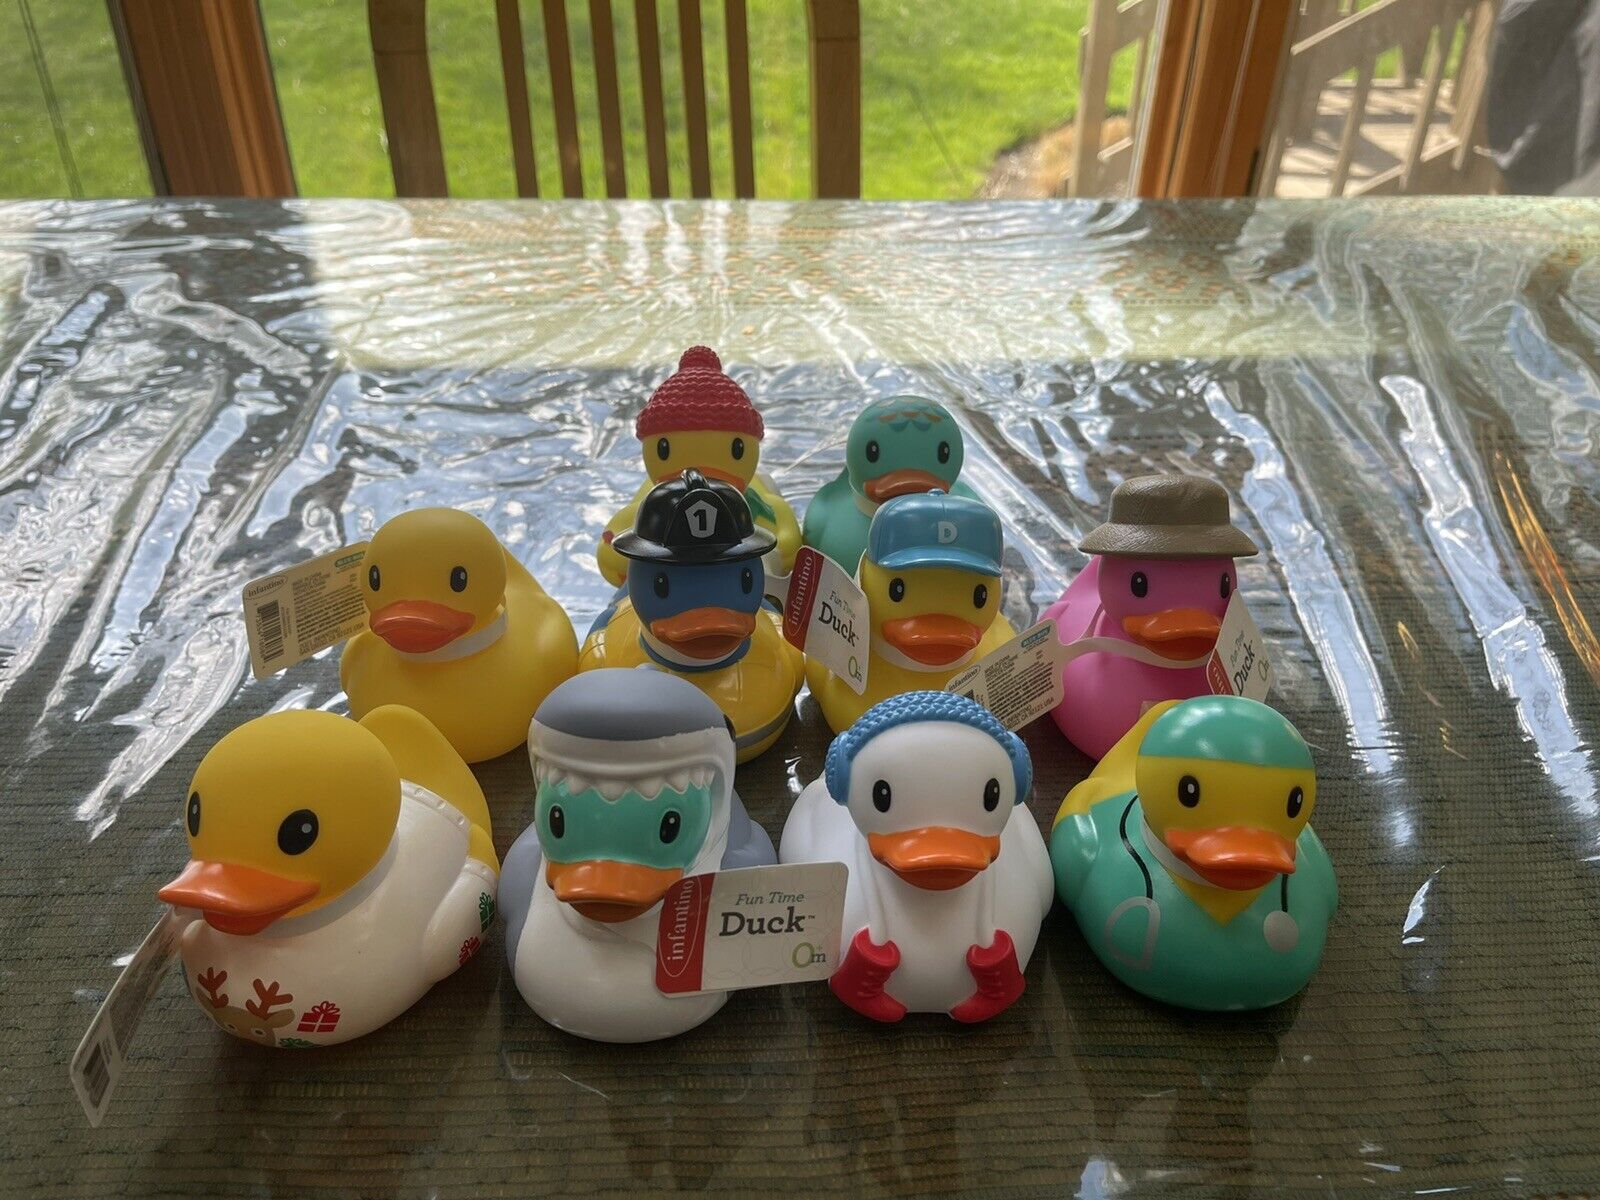 NWT SET WITH 10 Mixed Large discharge sale Selling Fun Rubber Infantino Ducks Time